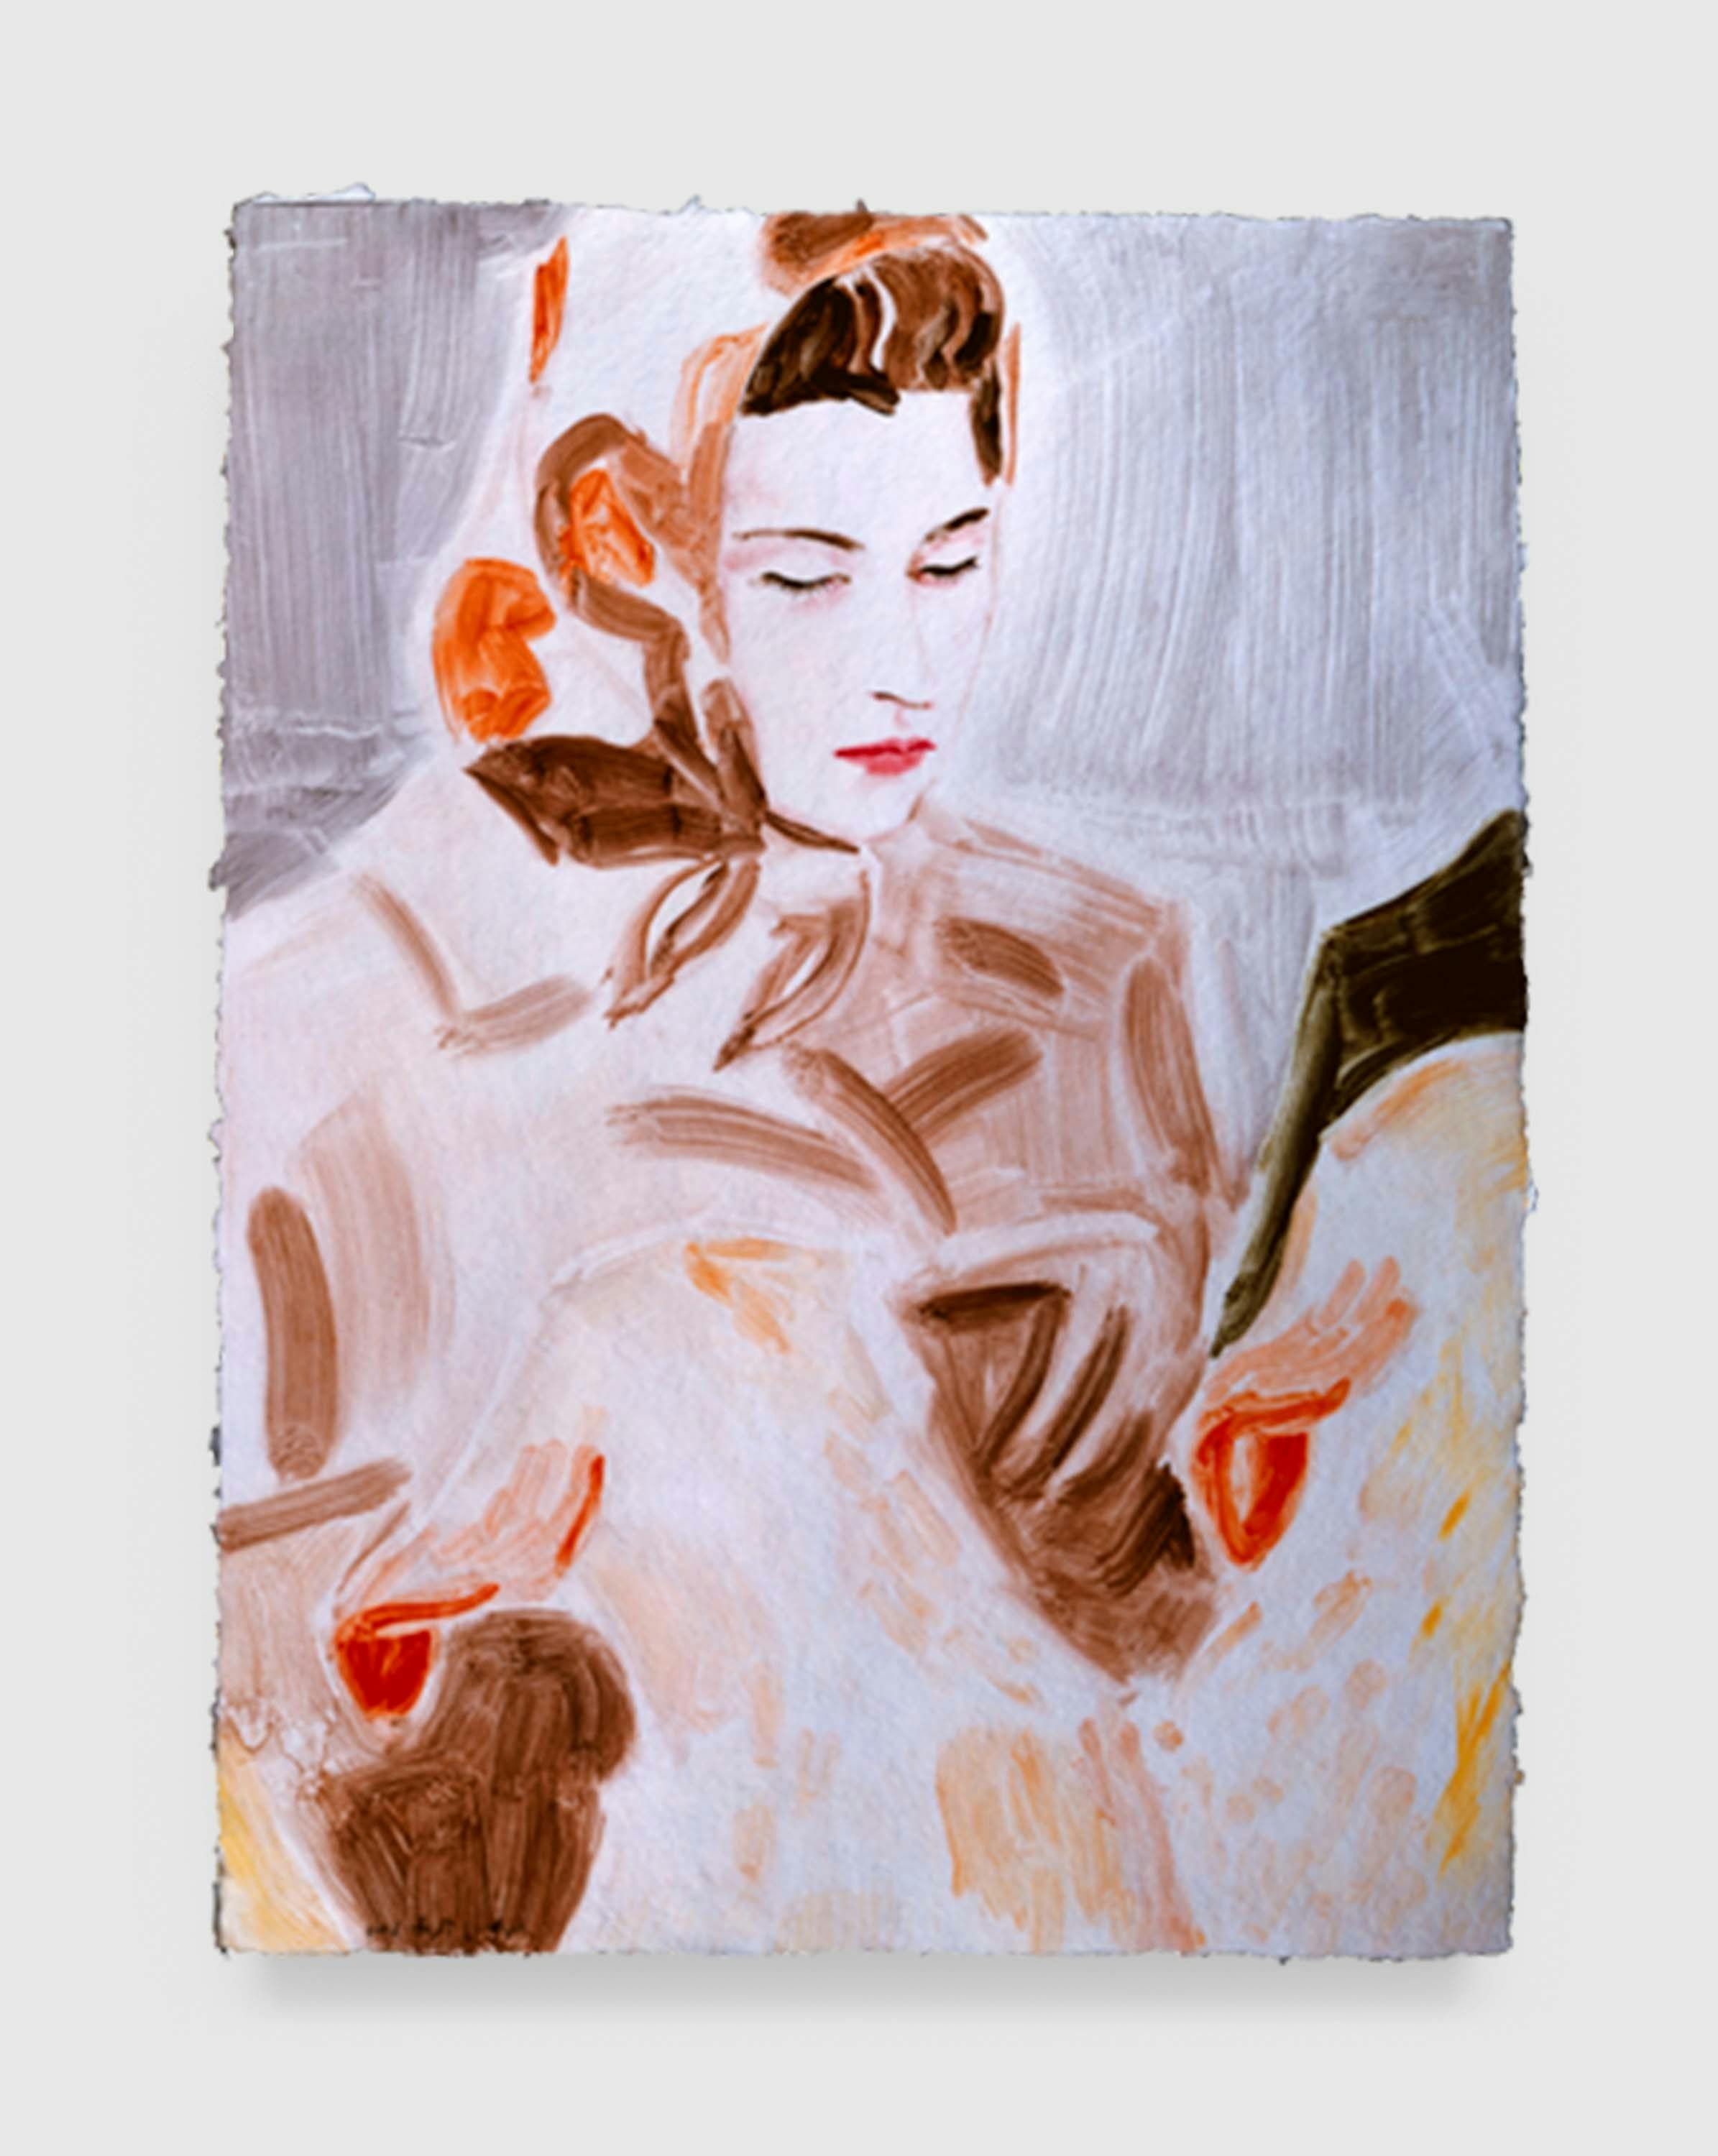 A mixed media artwork by Elizabeth Peyton, titled Balmoral (Queen Elizabeth II in the 70's), dated 2002.